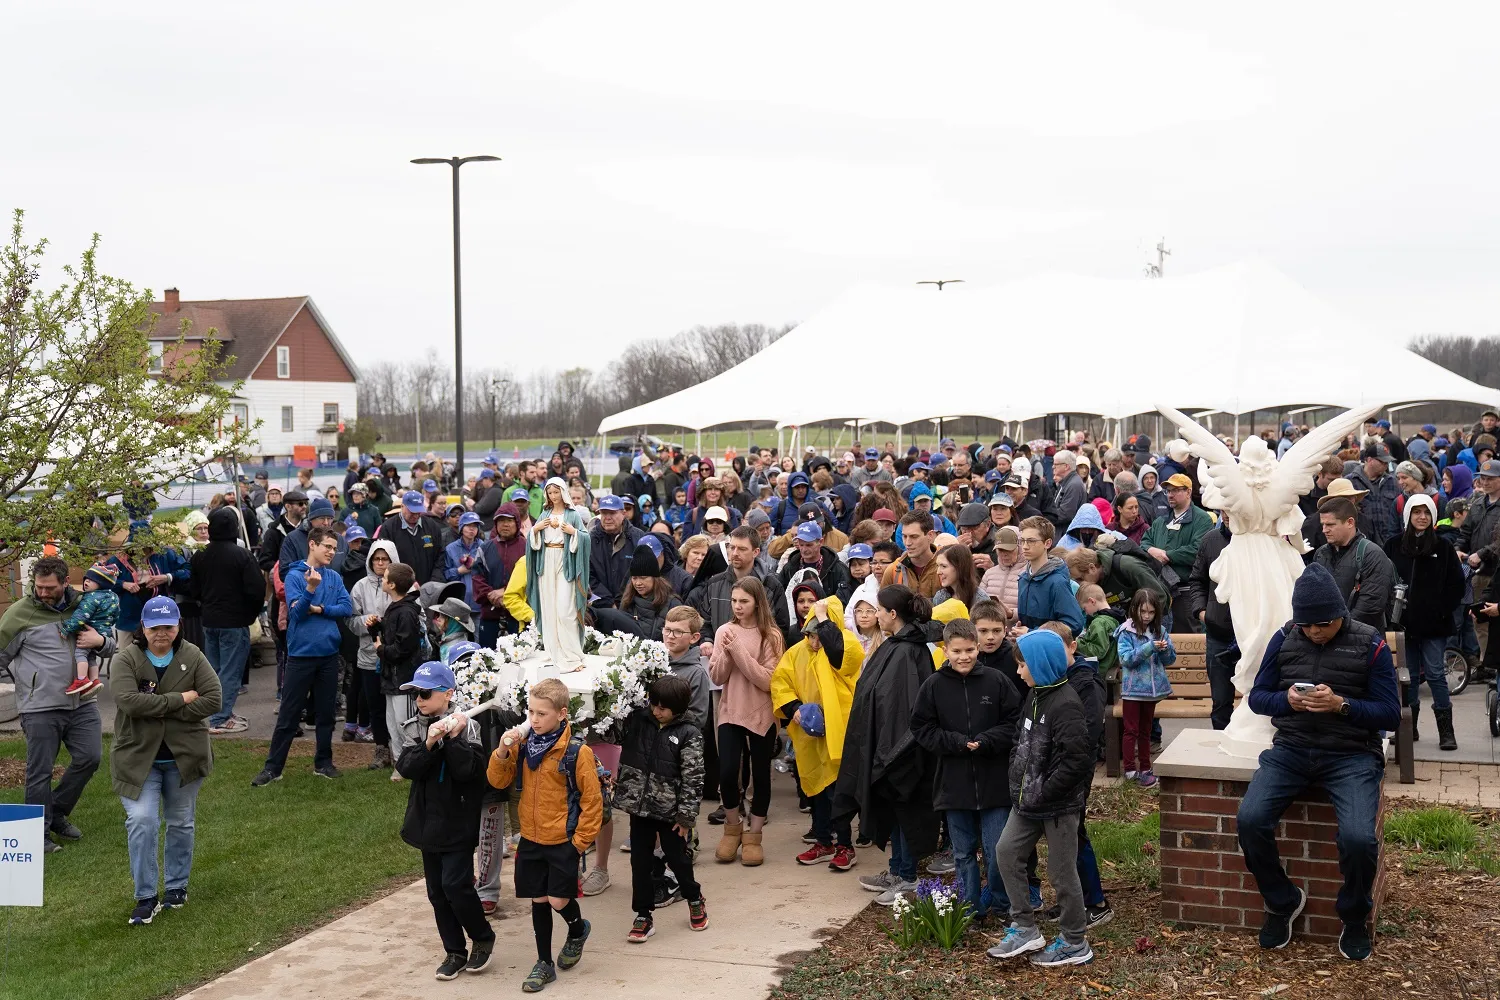 Thousands of pilgrims come together each year to take part in the annual Walk to Mary, which takes place on the first Saturday of May in Wisconsin. The 21-mile pilgrimage starts at the National Shrine of St. Joseph in De Pere, Wisconsin, and ends at the National Shrine of Our Lady of Champion in Champion, Wisconsin.?w=200&h=150